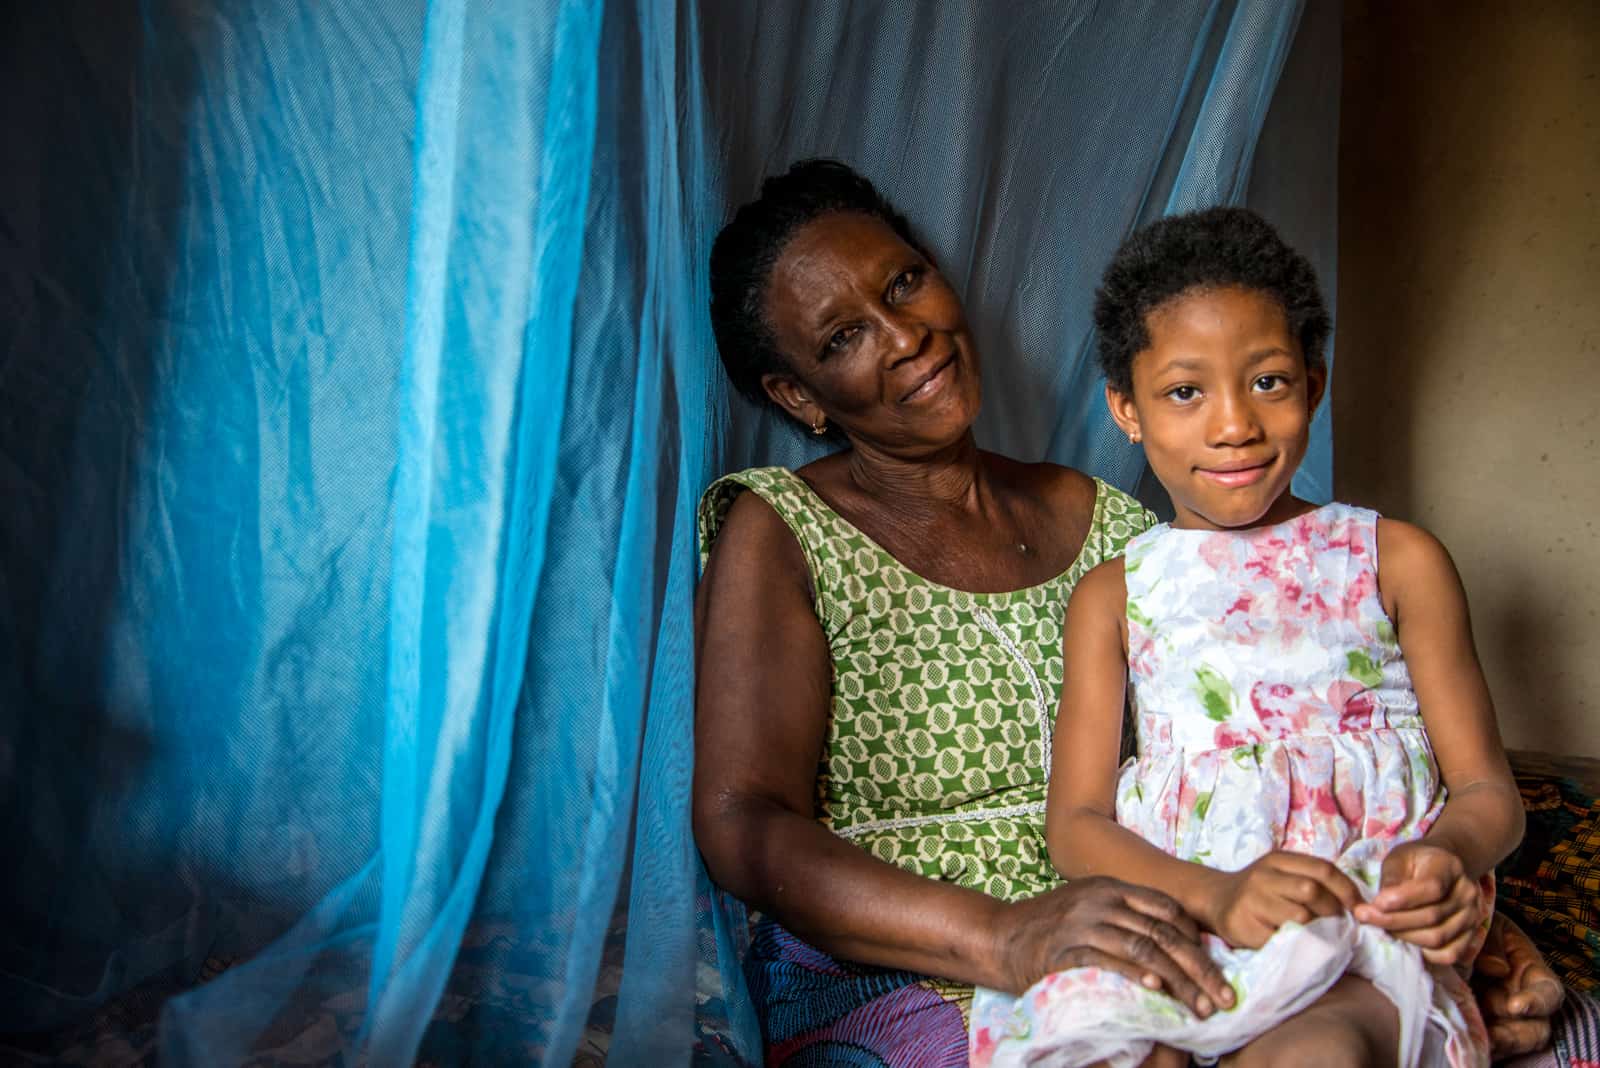 A Staggering Drop in Child Malaria Deaths in Just One Year